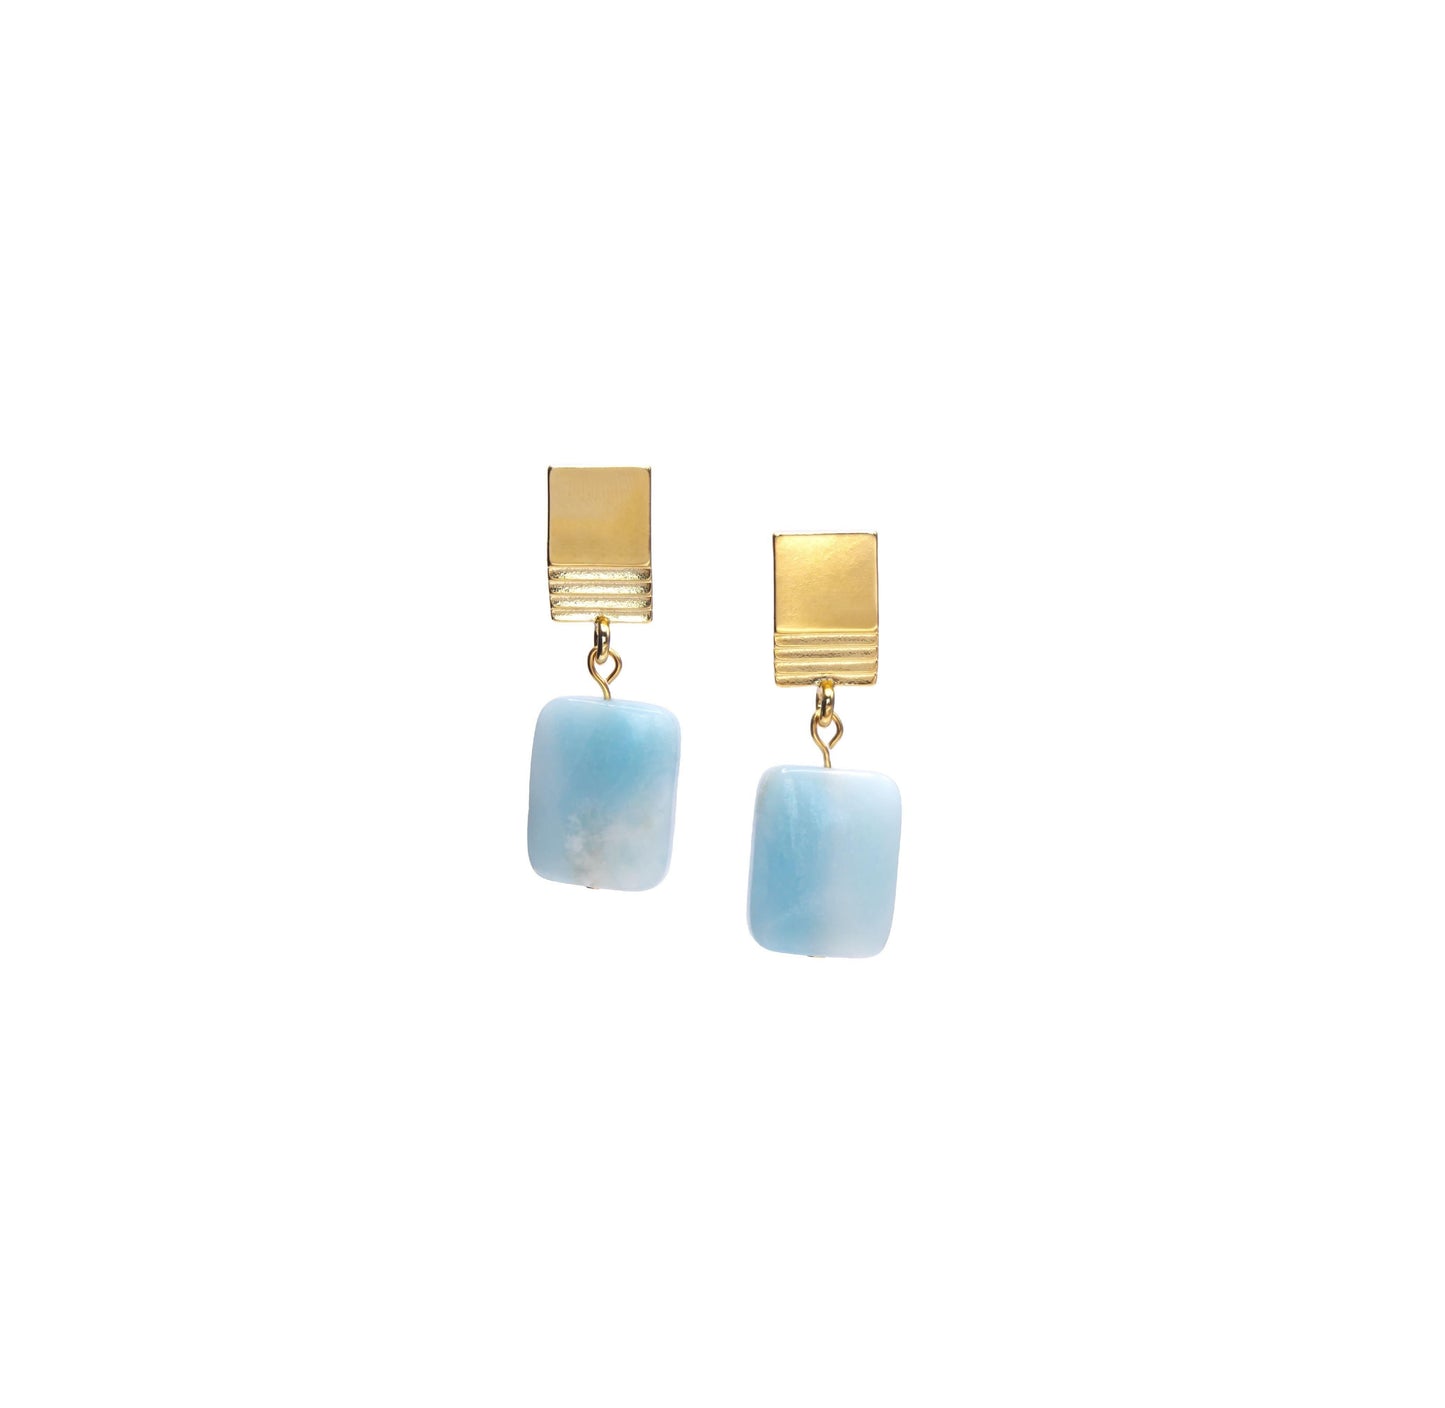 Load image into Gallery viewer, gold layered square + amazonite earrings - gold layered square + amazonite earrings - VUE by SEK
